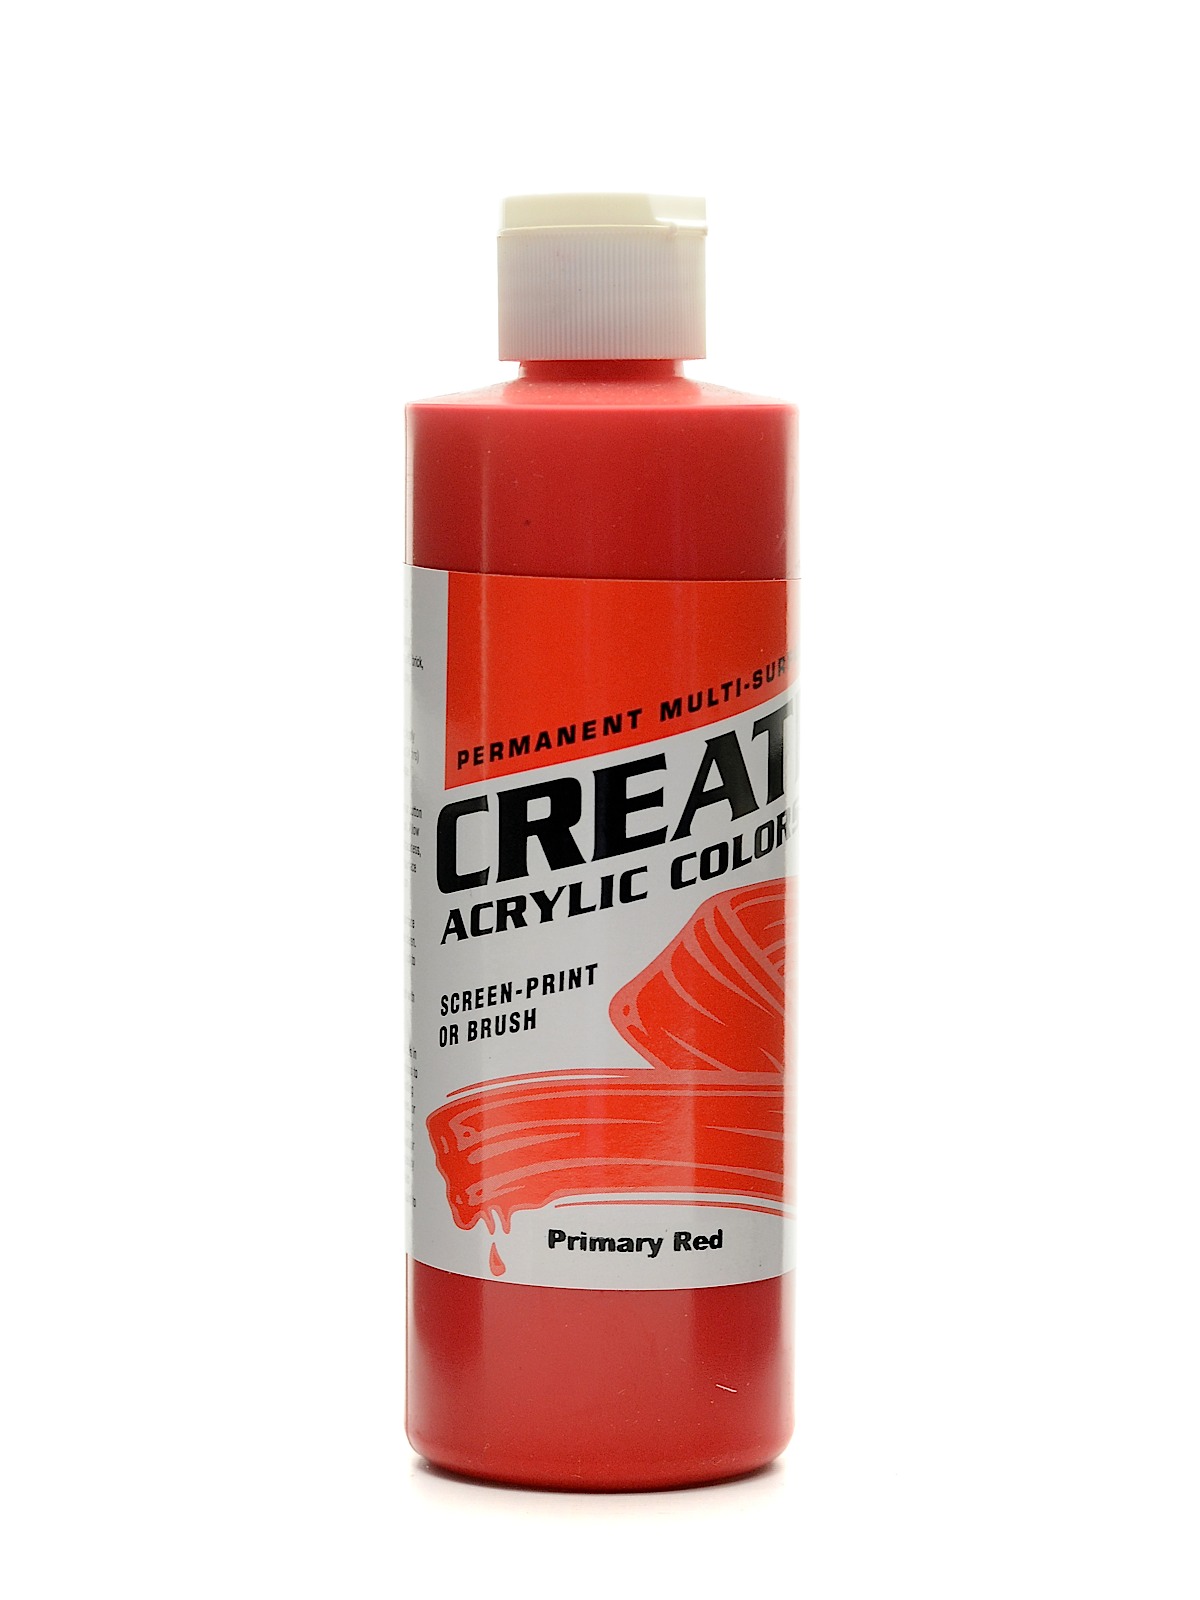 Acrylic Colors Primary Red 8 Oz.